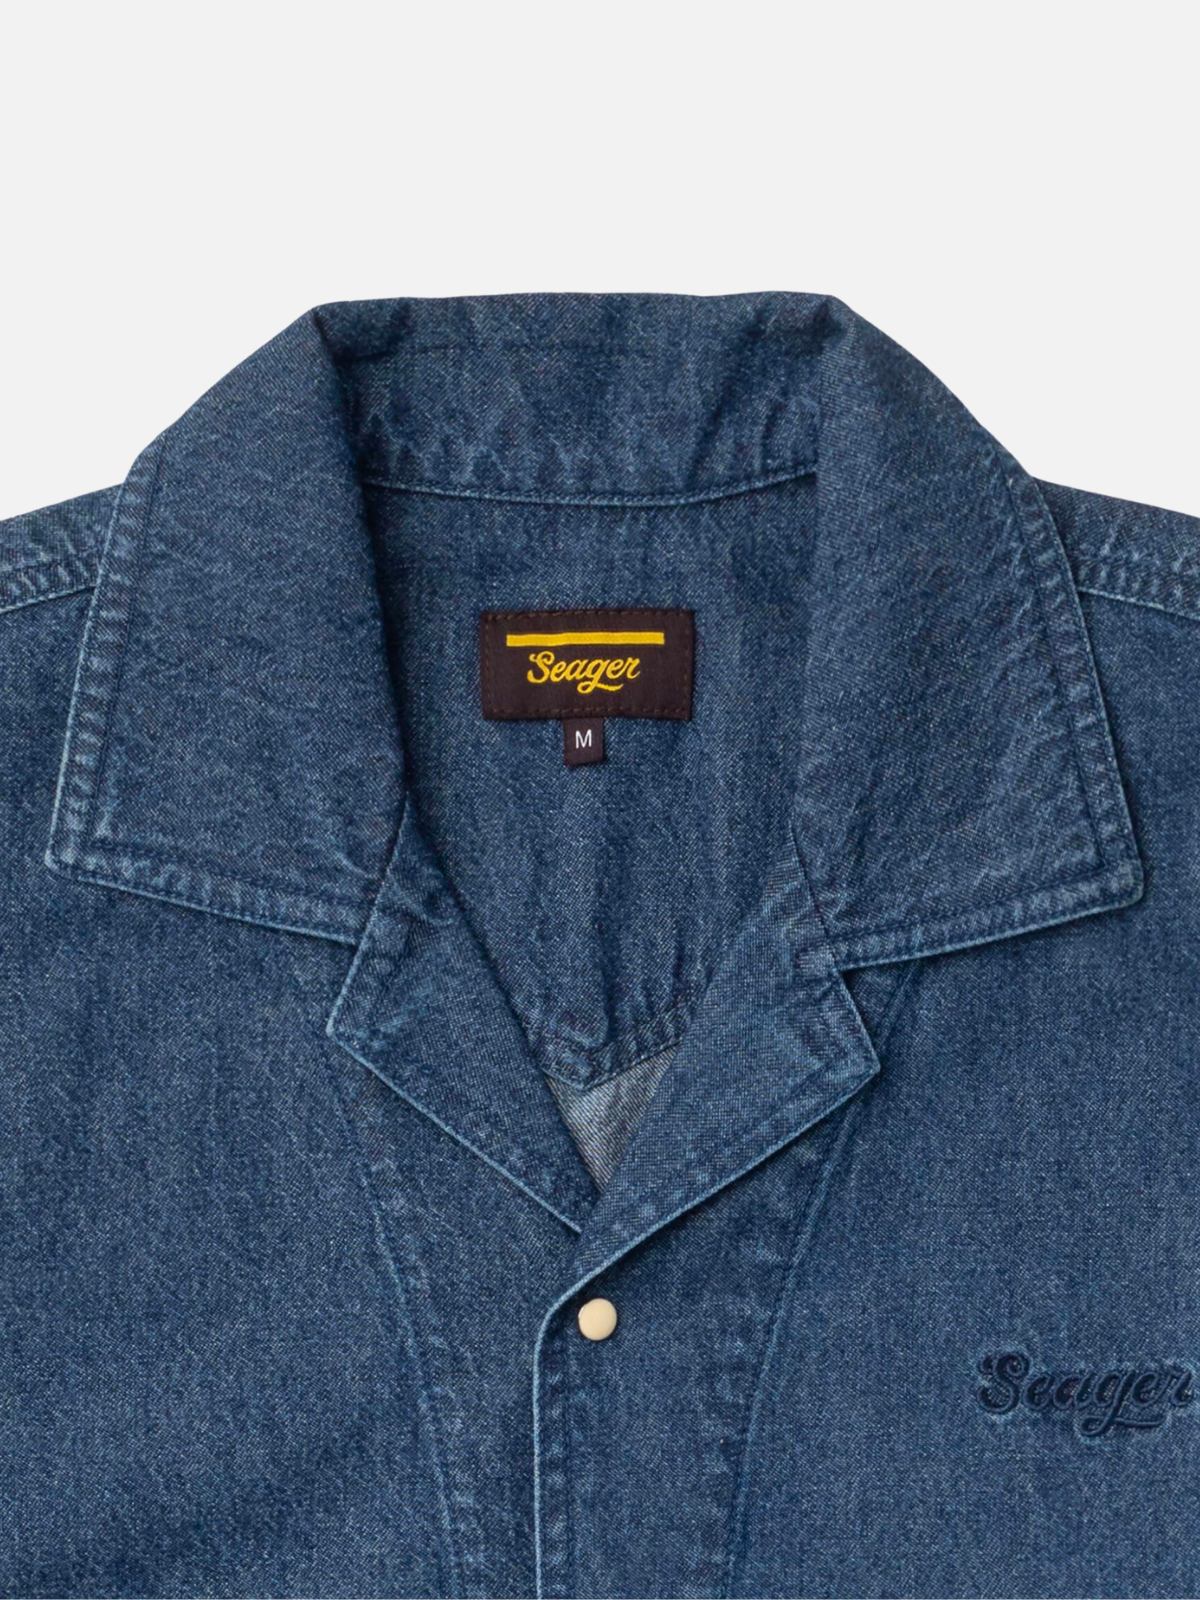 seager south paw whippersnapper ss short sleeve pearl snap button up dark indigo denim chambray kempt athens ga georgia men's clothing store